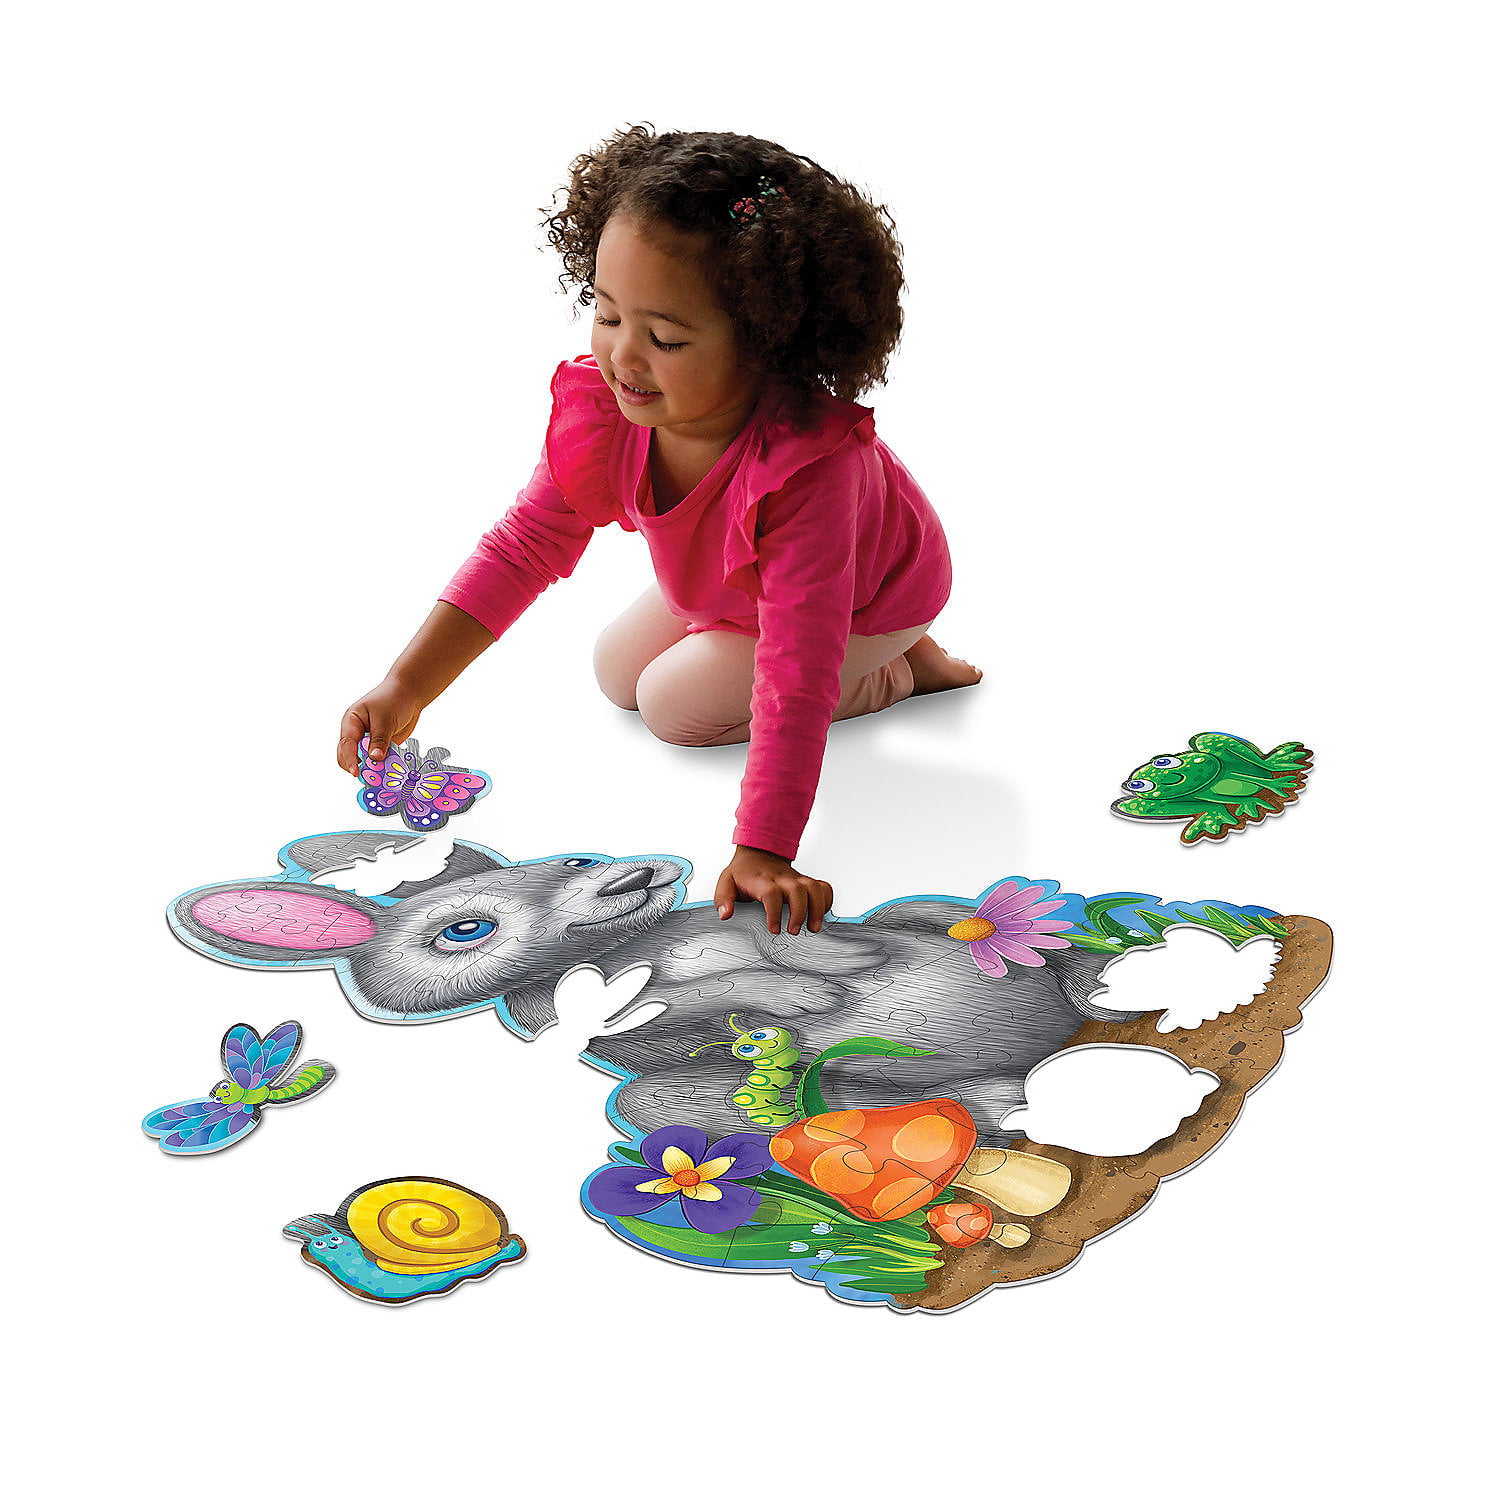 Educational Toys for Toddlers Ravensburger Baby Shark 24 Piece Giant Floor Jigsaw Puzzles for Kids Age 3 Years Up